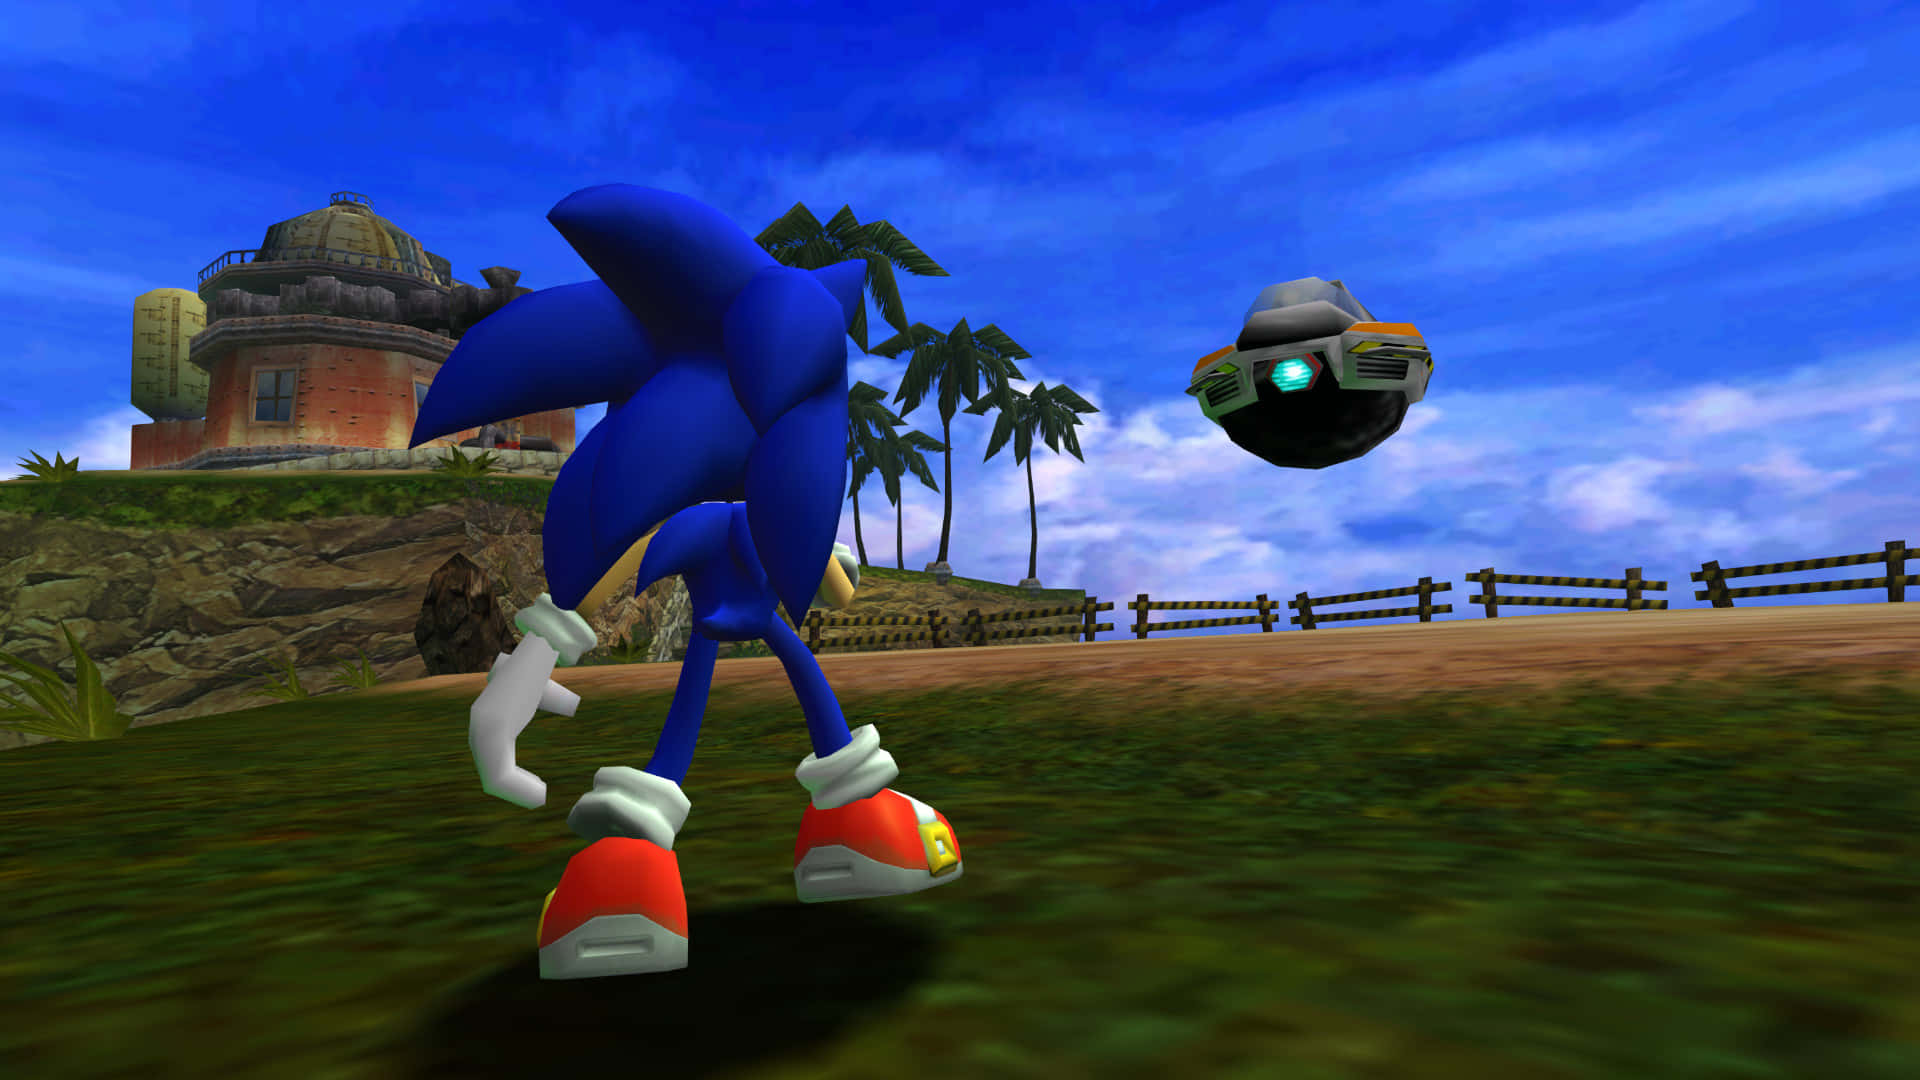 Sonic the Hedgehog Looks to Make an Epic Adventure